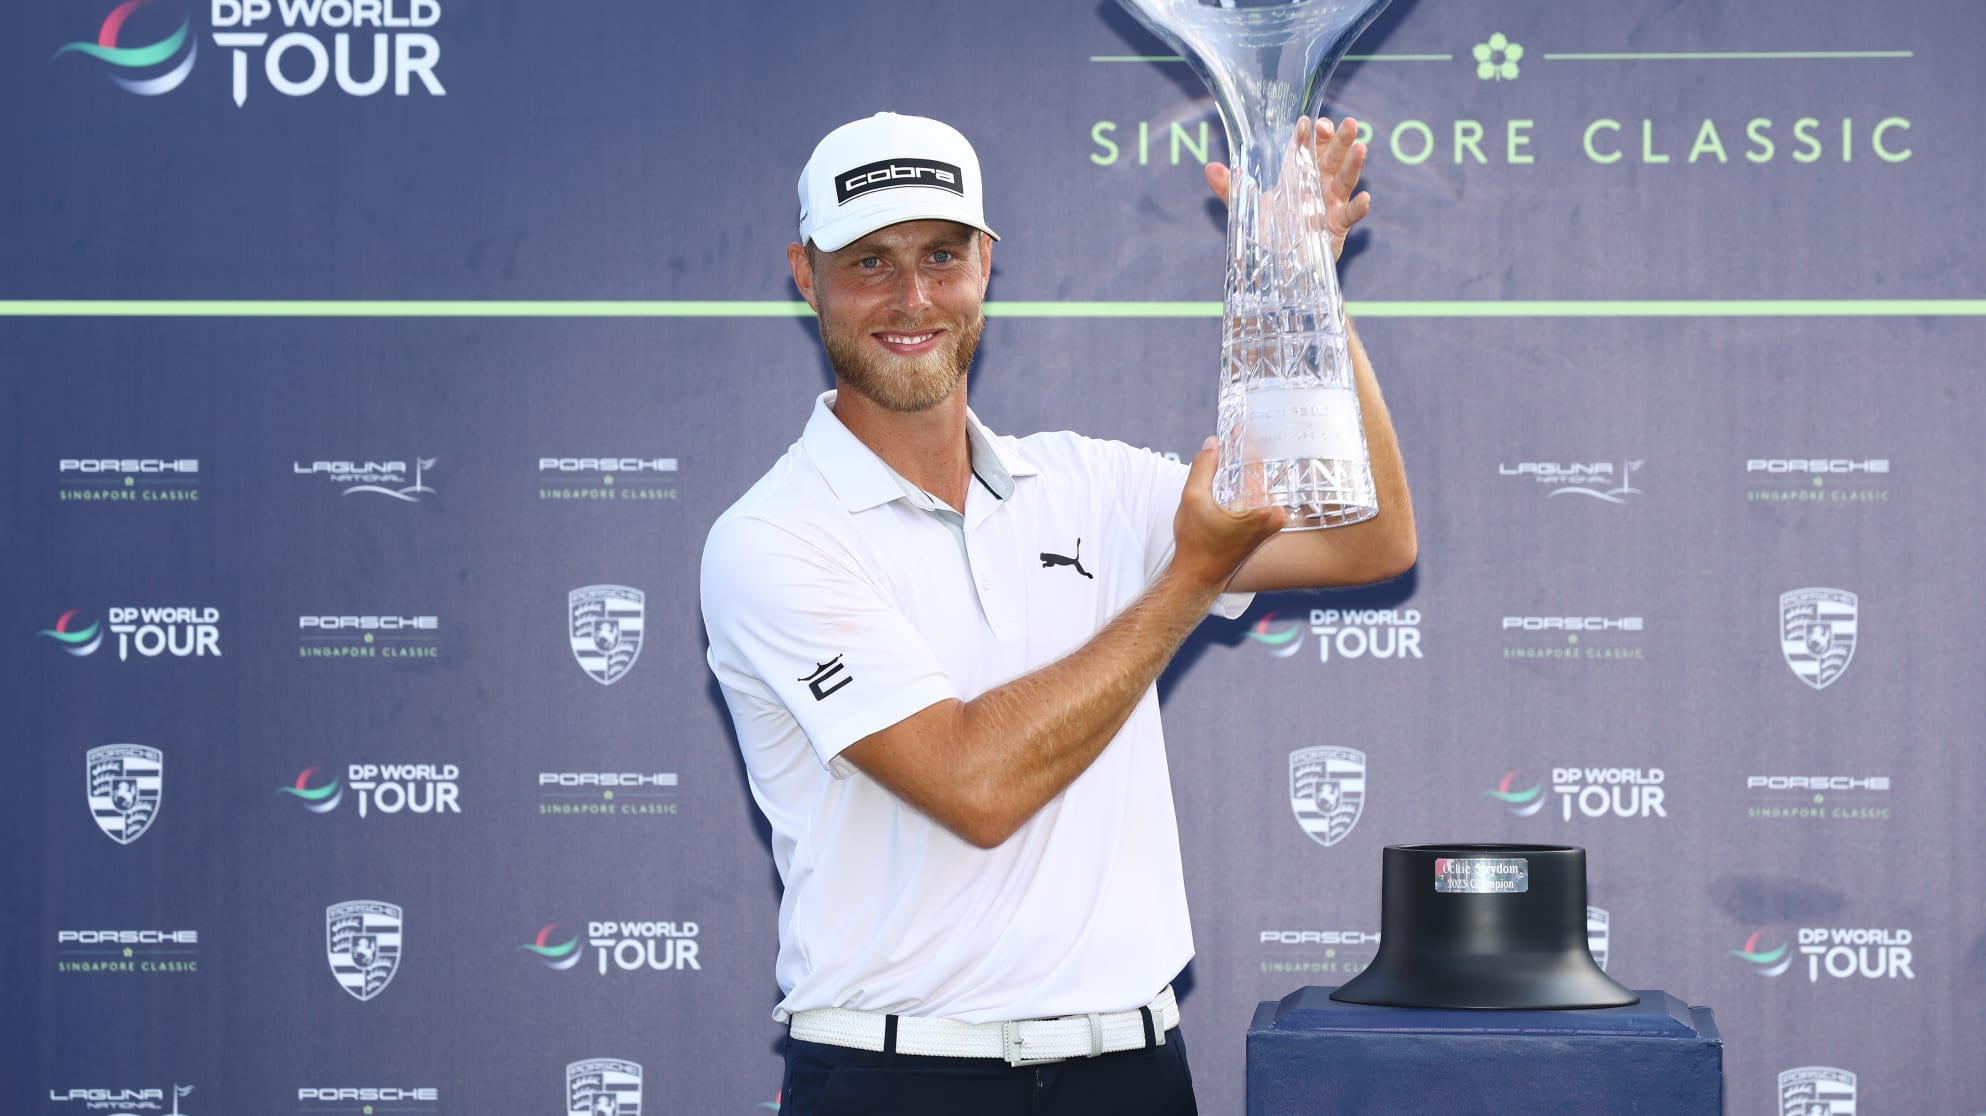 Jesper Svensson wins Singapore play-off for first DP World Tour victory -  Articles - DP World Tour